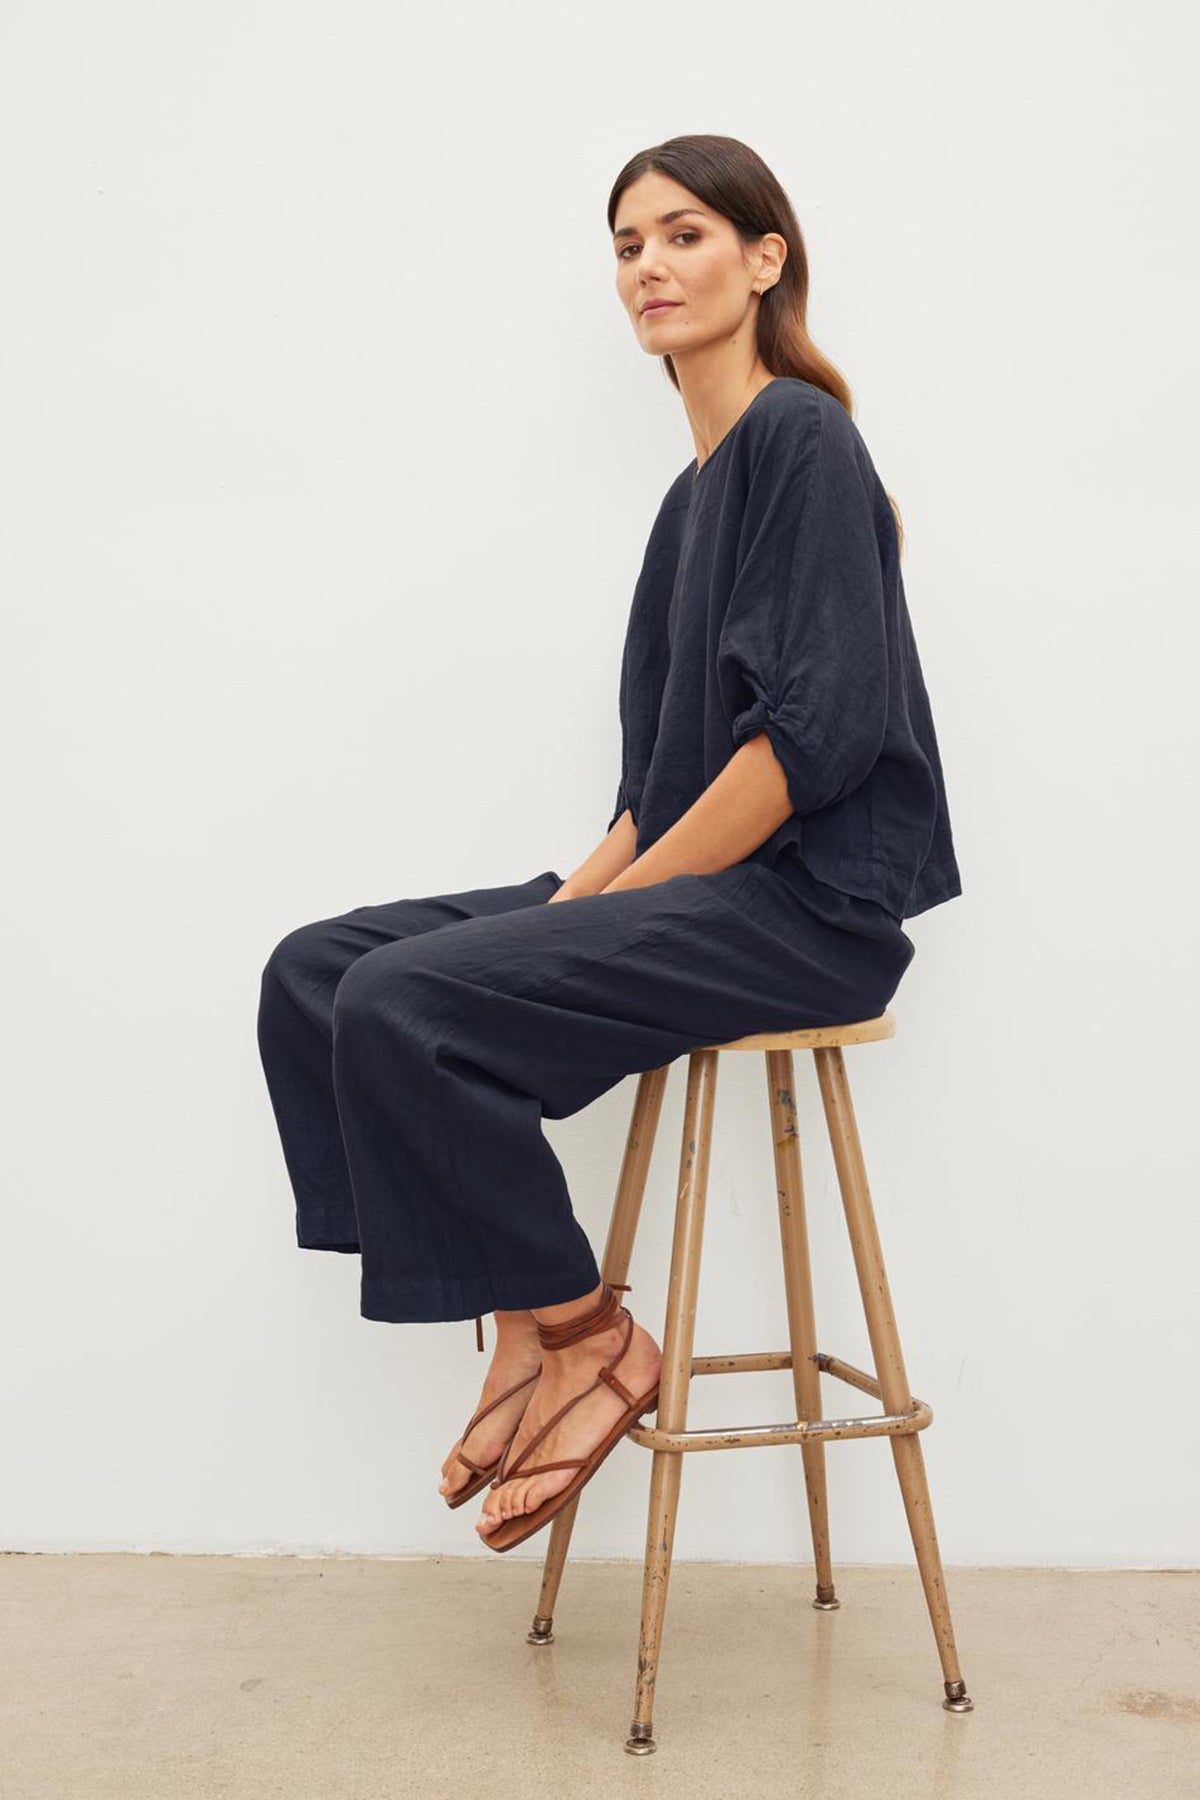   Woman with long dark hair sits on a wooden stool wearing a loose-fitting navy outfit with Velvet by Graham & Spencer's LOLA LINEN PANT and brown sandals, against a plain white background. 